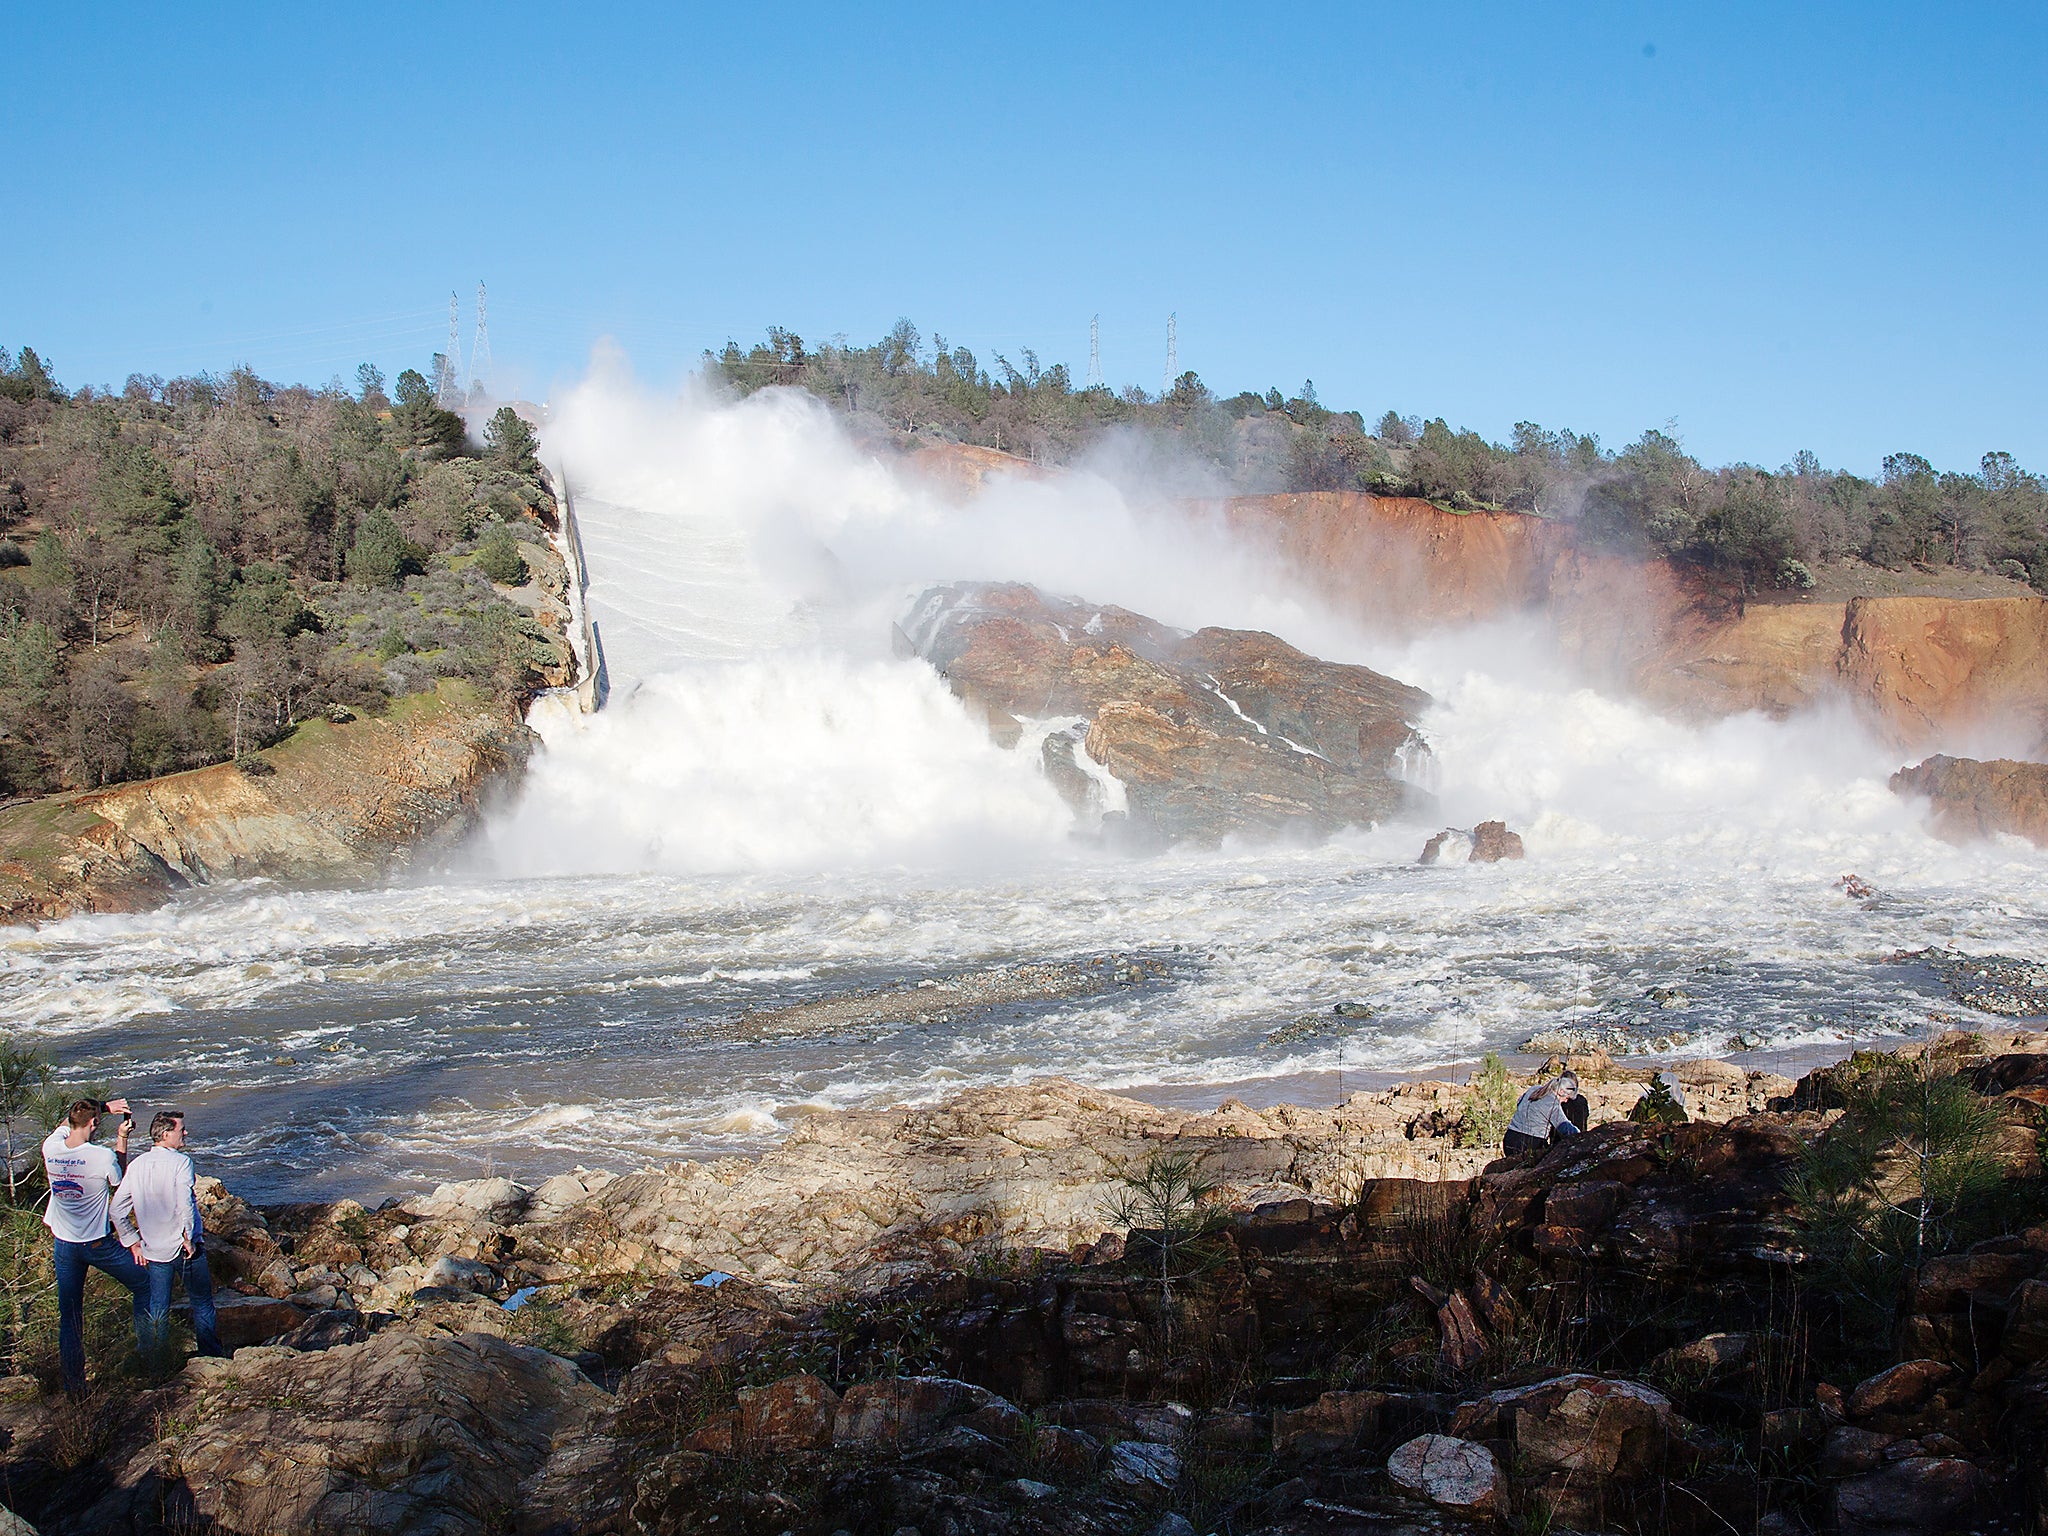 Water cascading into the Feather River from the damaged Oroville Dam spillway in Butte County, USA. Nearly 200,000 people living downstream from the tallest dam in the US were ordered to evacuate their homes over the weekend because an overflow channel appeared to be in danger of imminent collapse